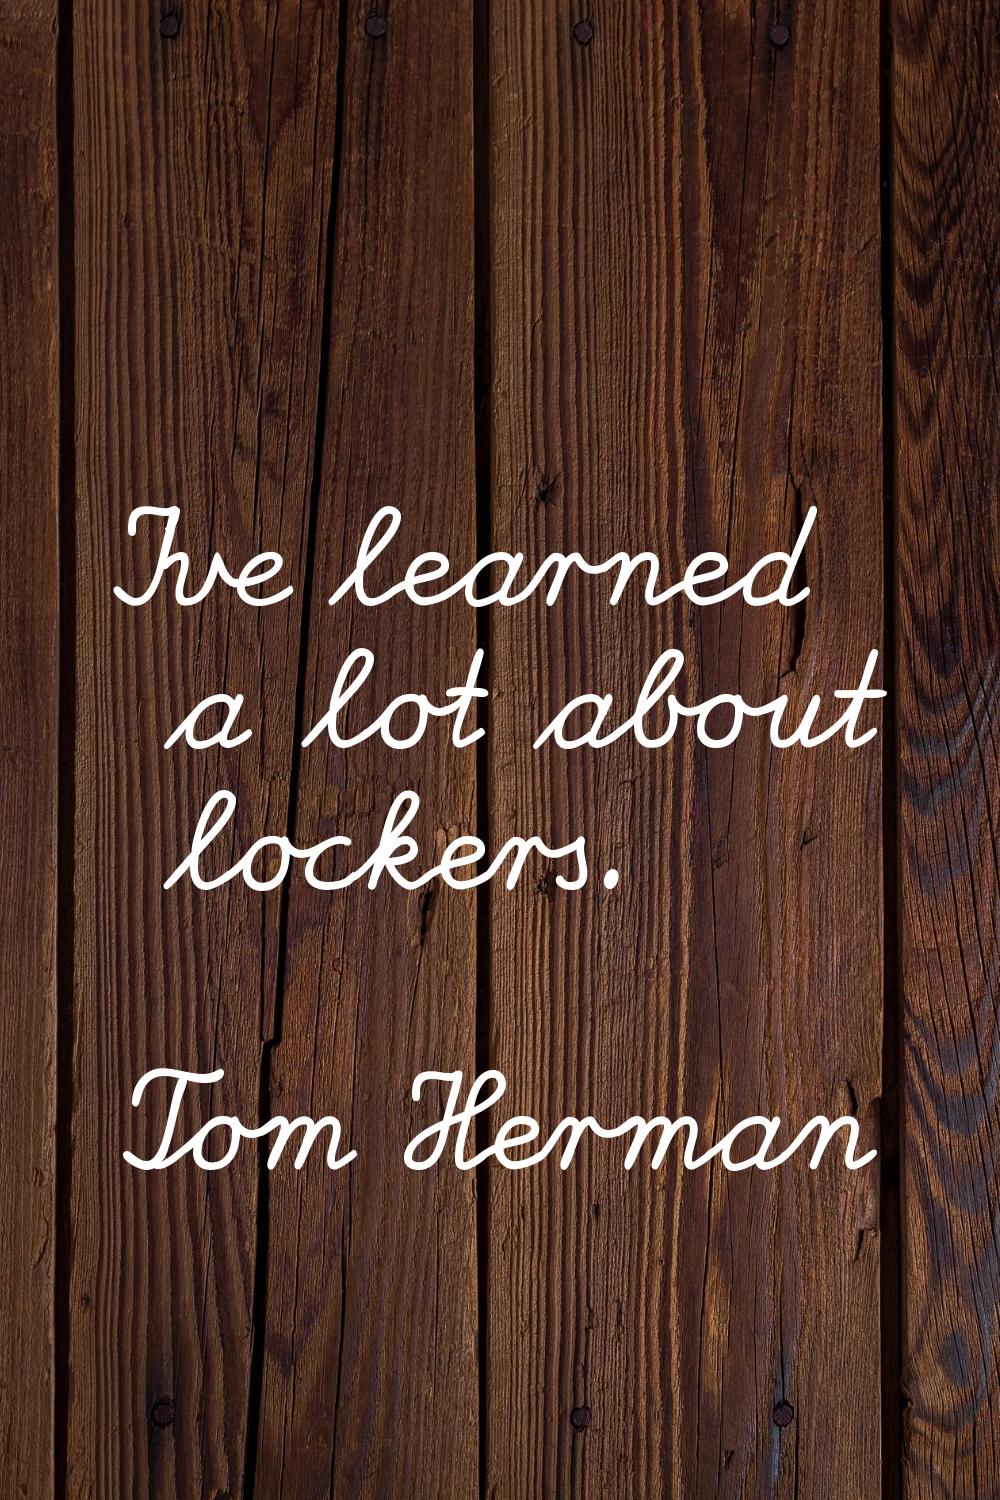 I've learned a lot about lockers.